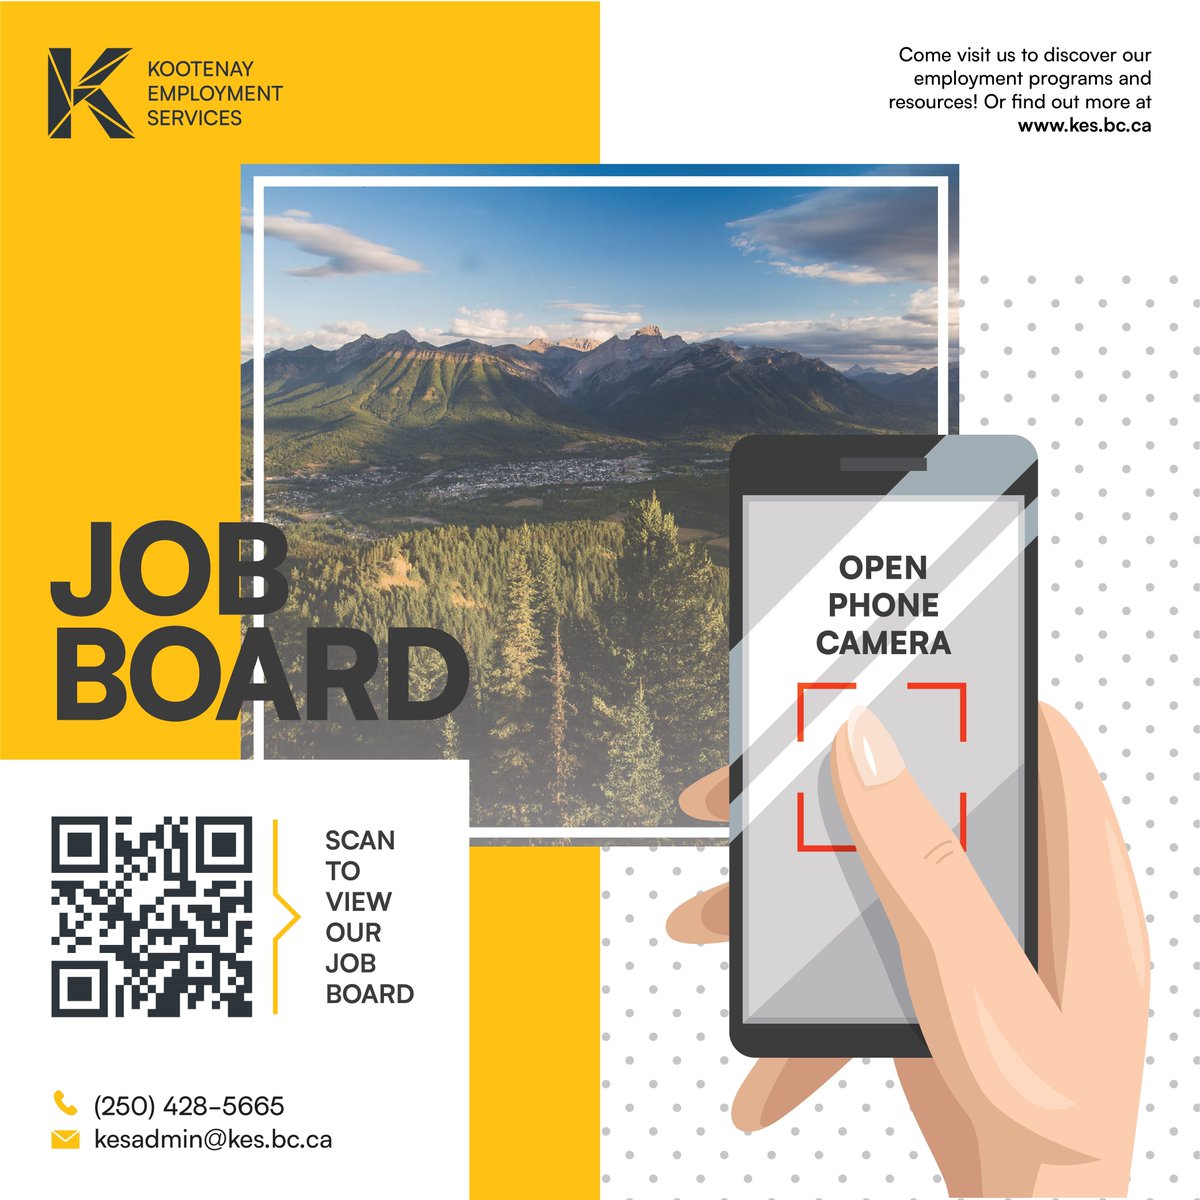 Looking for a job or have one to post? Our job board is here for you! You can browse jobs across the East Kootenays and post positions to a wide audience! Need some assistance? Our Employment Resource Advisors are here to help!
See our job board here: jobs.kes.bc.ca